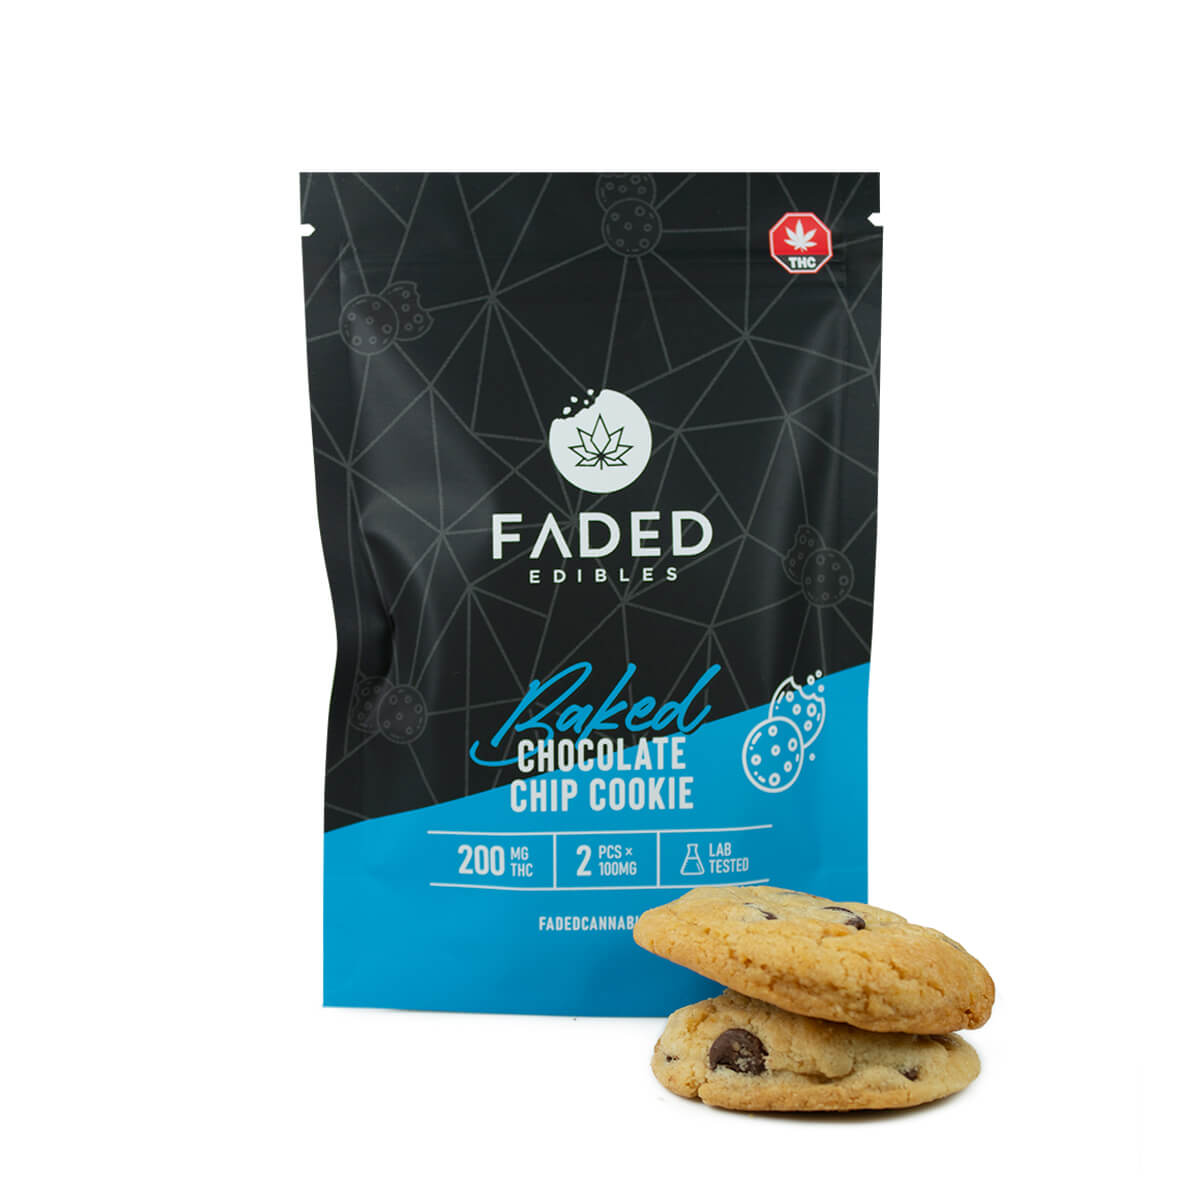 Faded Baked – Chocolate Chip Cookies 200mg THC